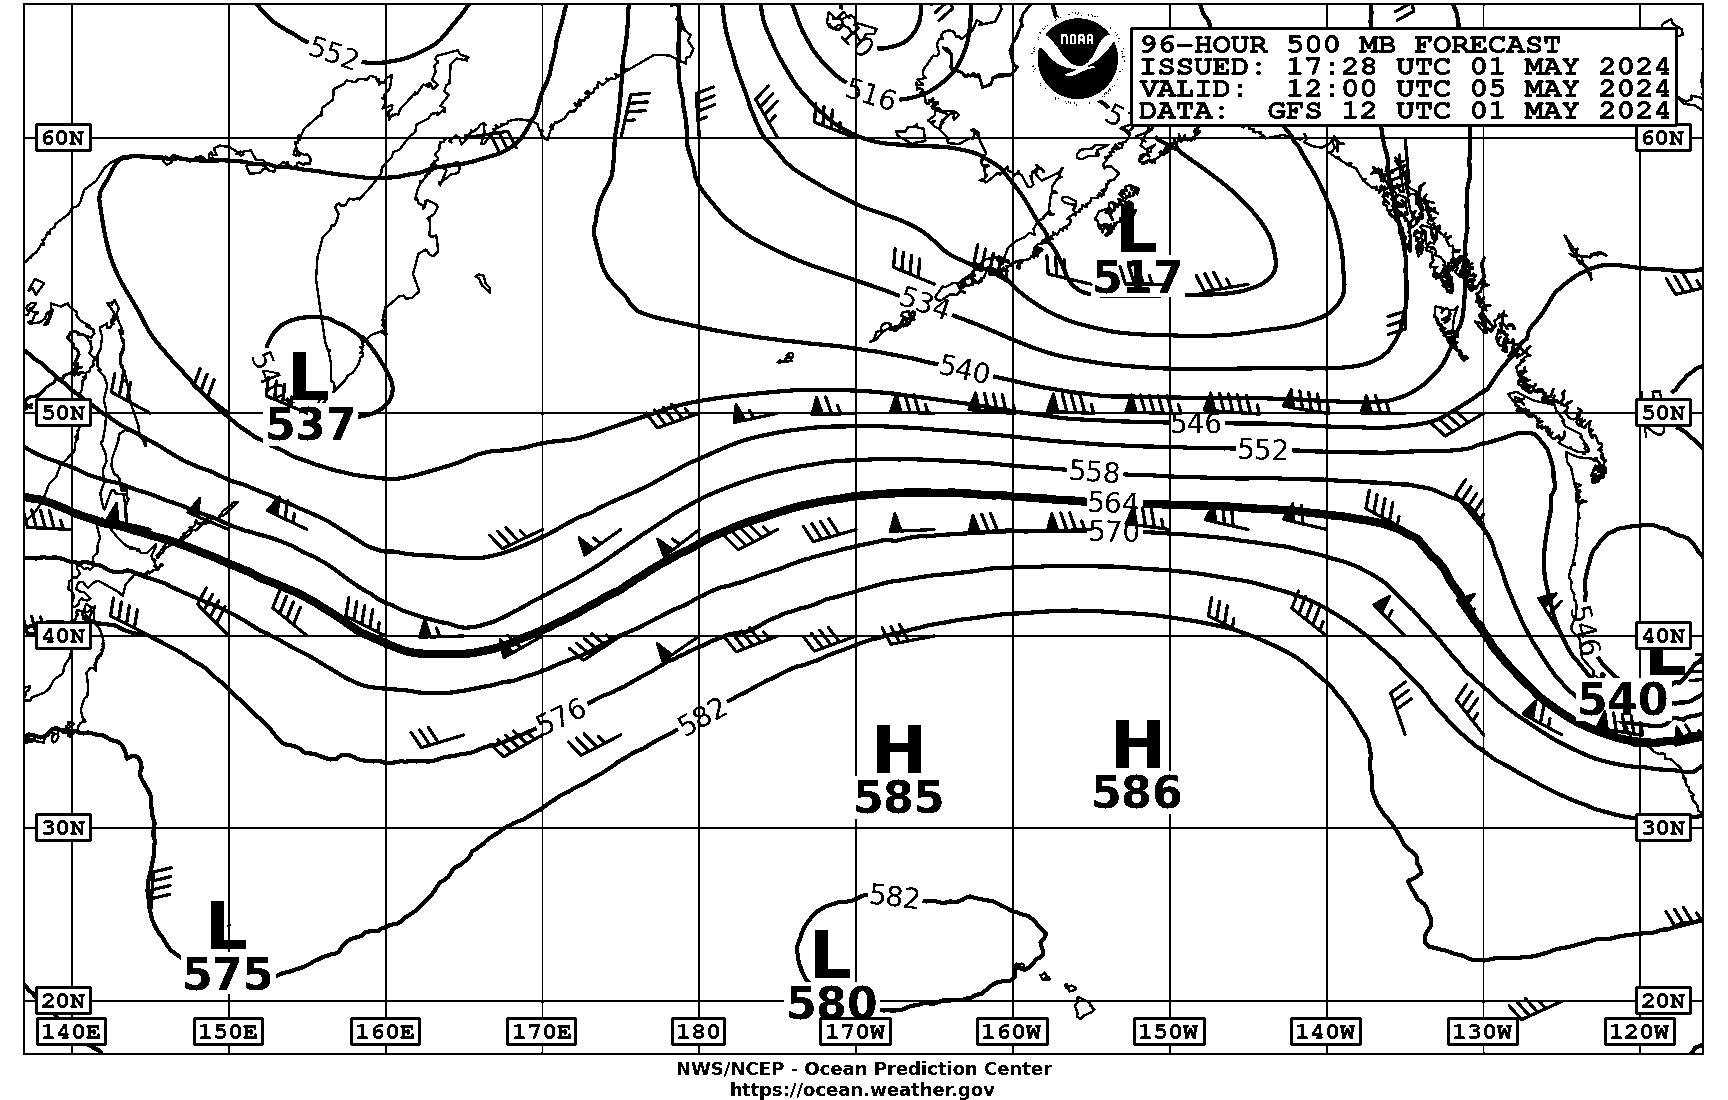 96 hour Pacific 500 mb